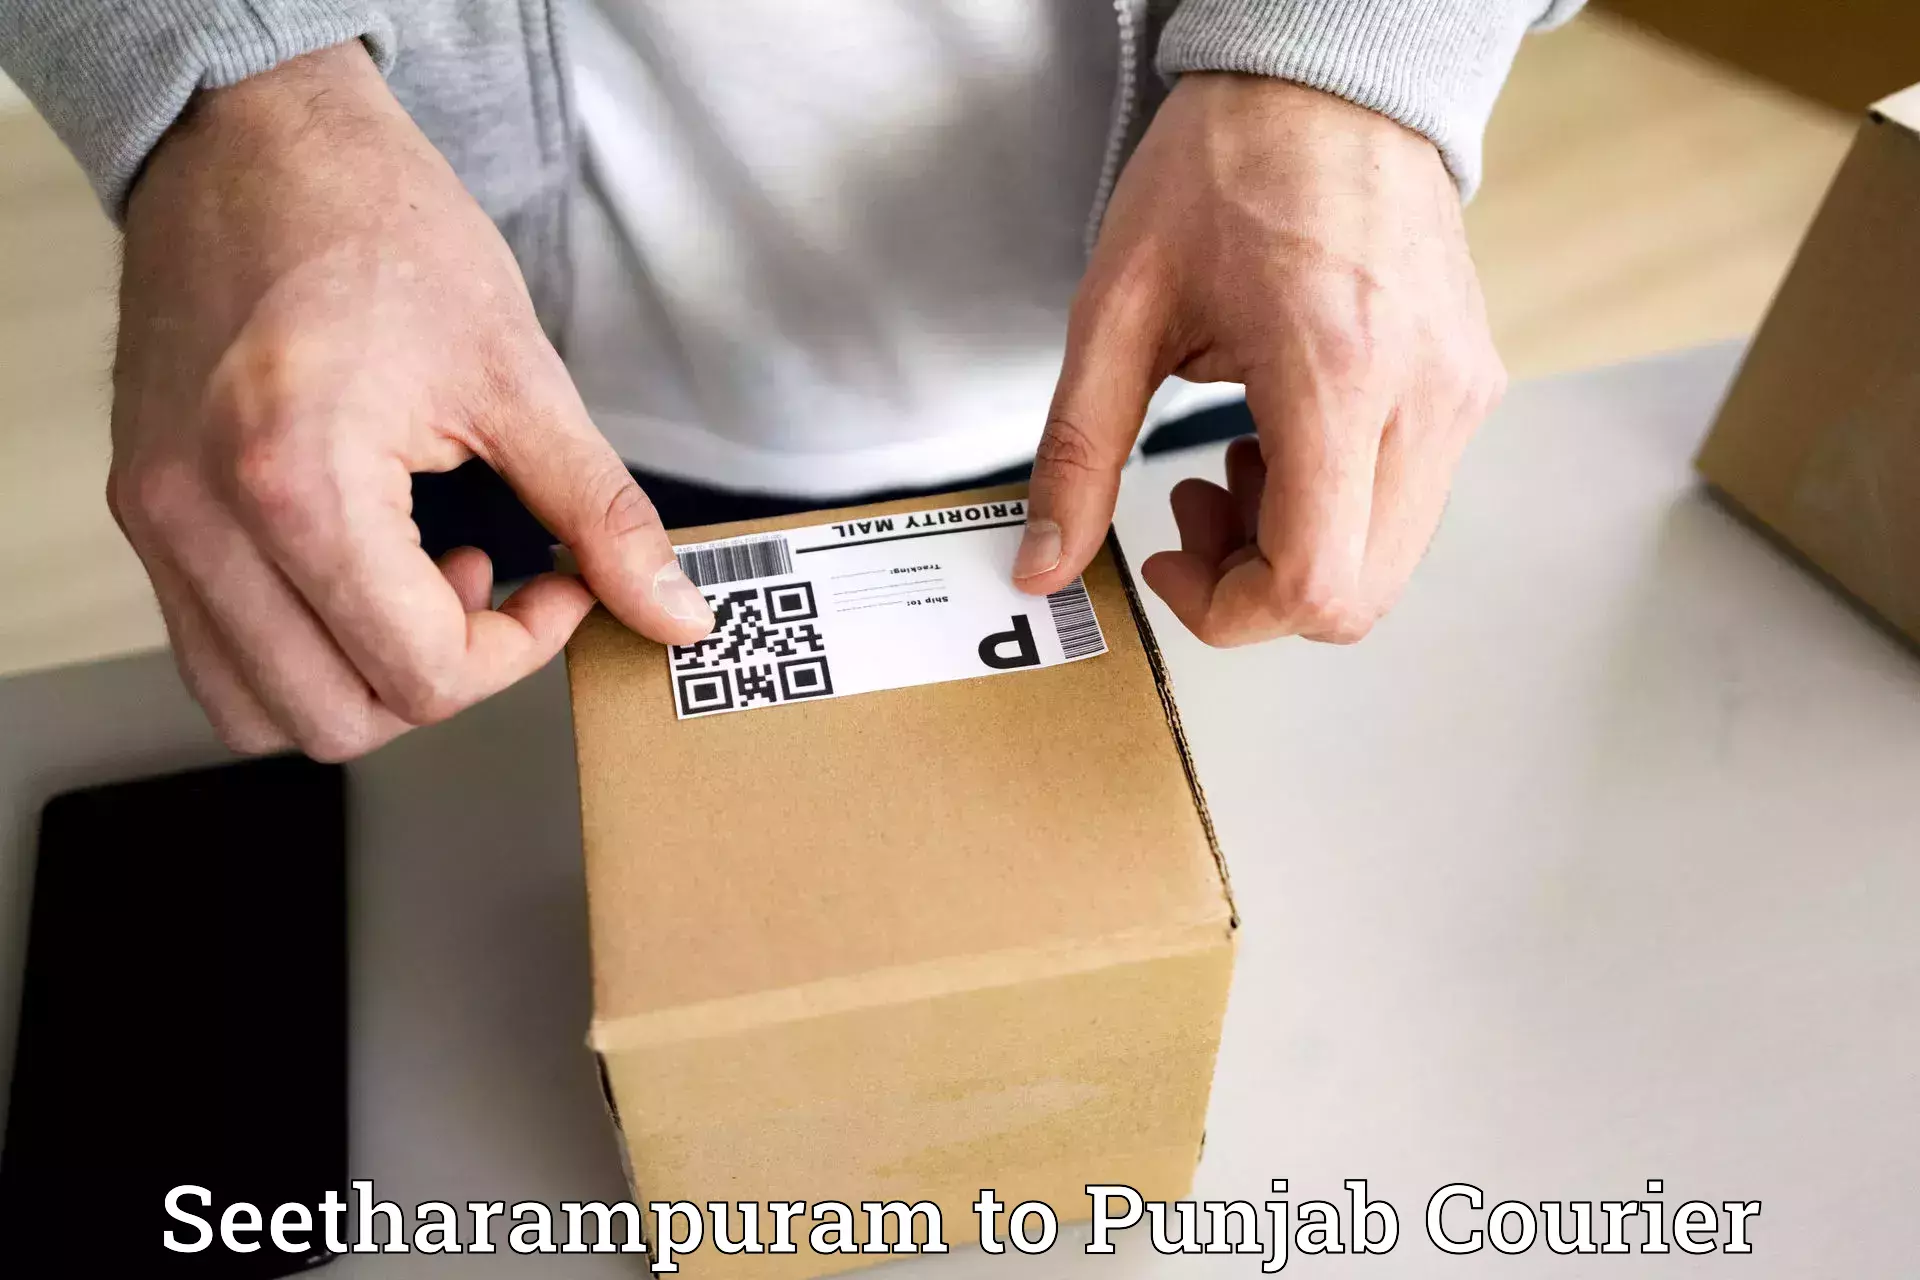 Automated parcel services Seetharampuram to Punjab